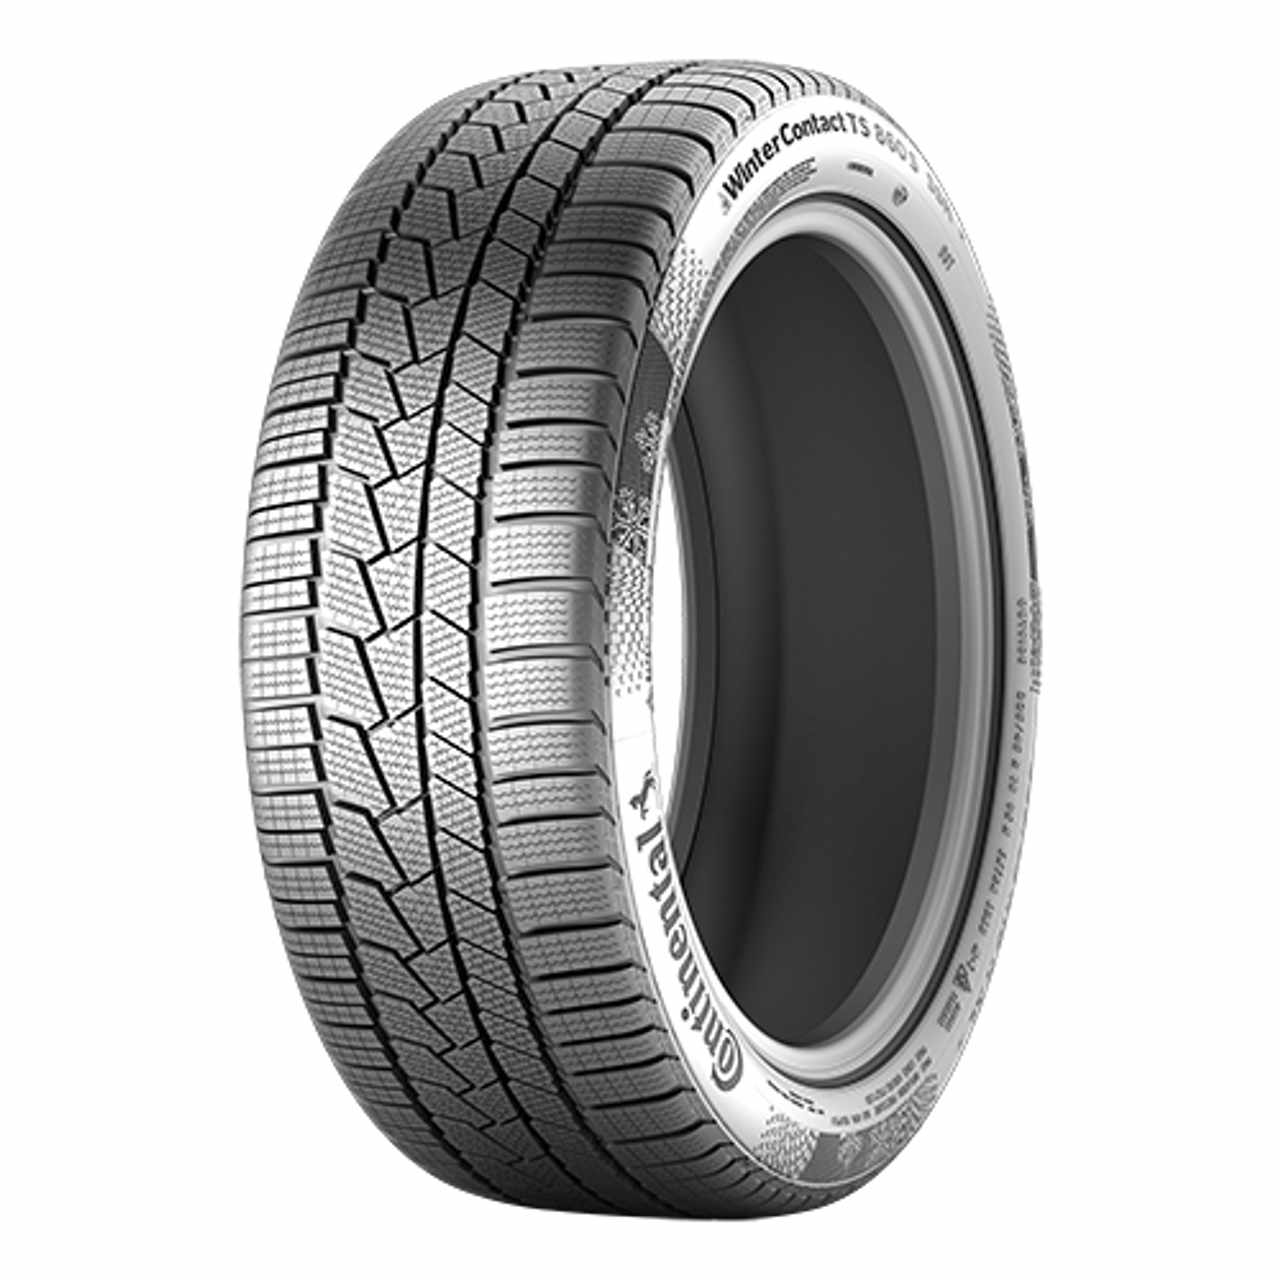 CONTINENTAL WINTERCONTACT TS 860 S (*) (MO) 275/35R20 102V FR BSW von Continental